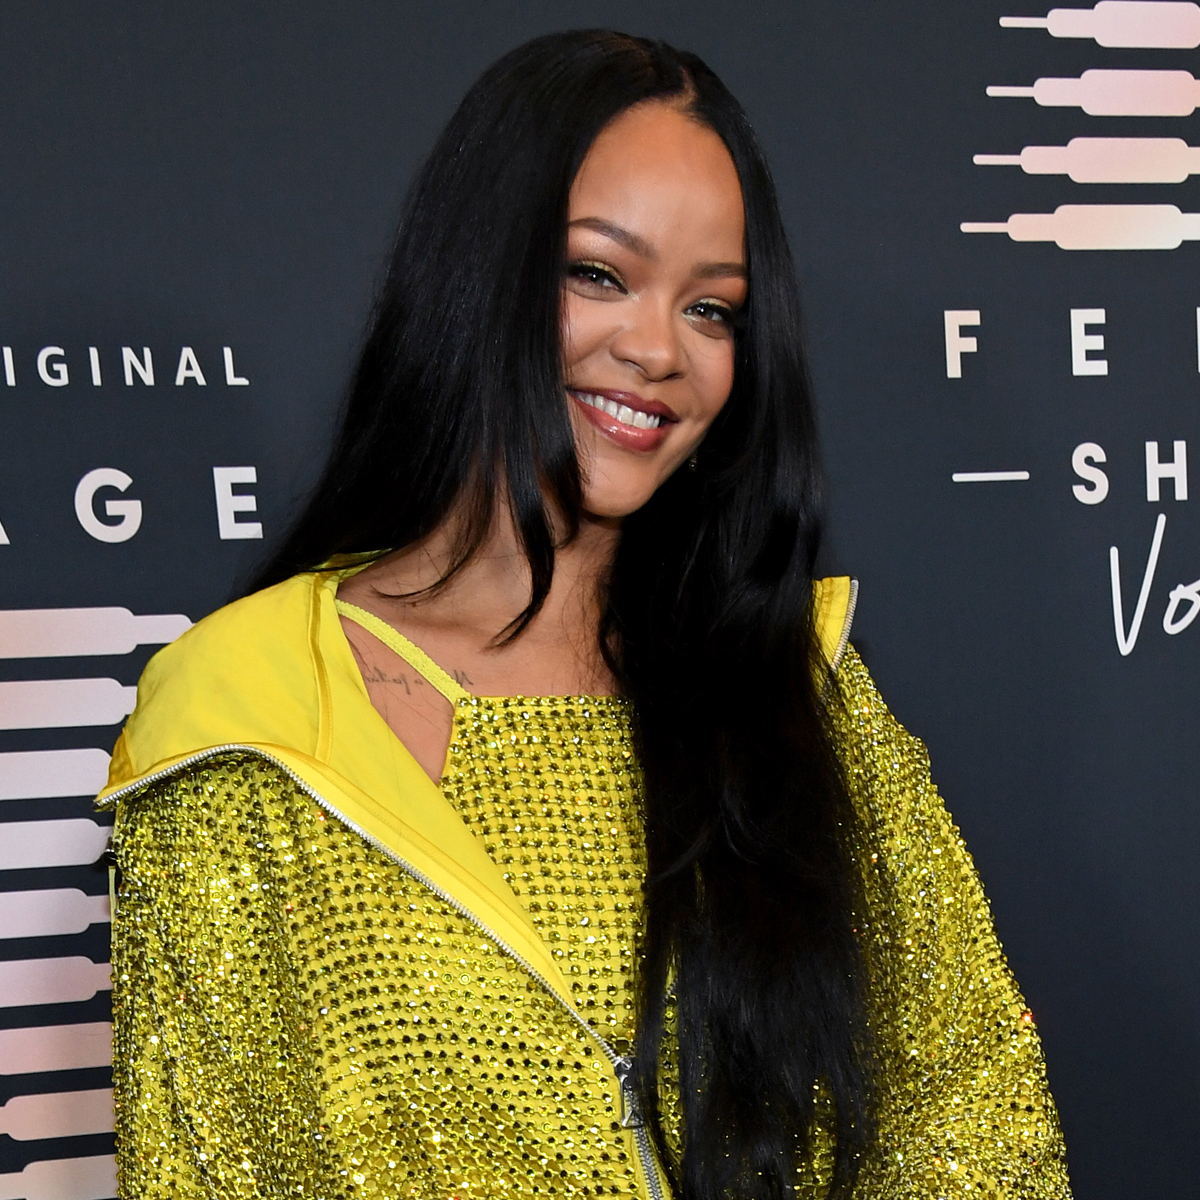 Rihanna Is Now the Youngest Self-Made Female Billionaire in America